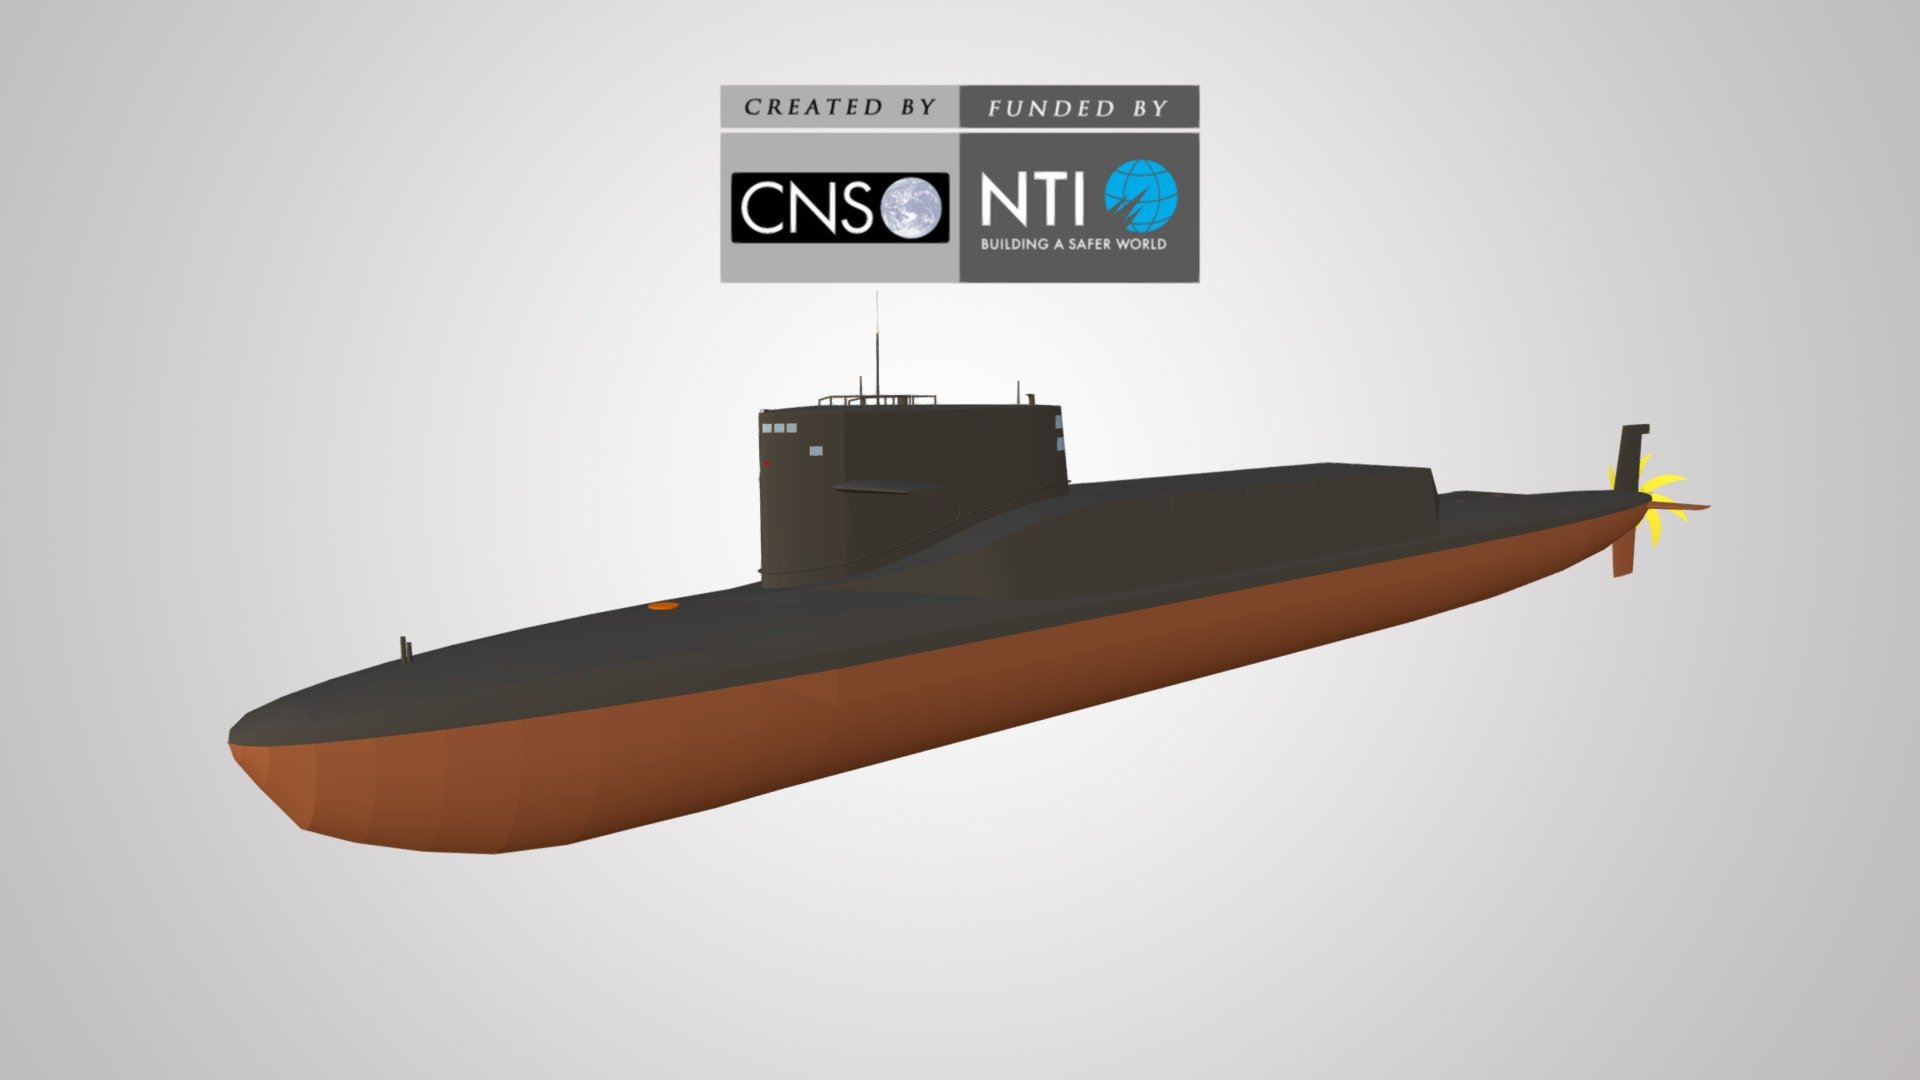 Learn more at: http://www.nti.org/analysis/articles/chinese-submarine-models/ - Jin-class SSBN - 3D model by JamesMartinCNS 3d model